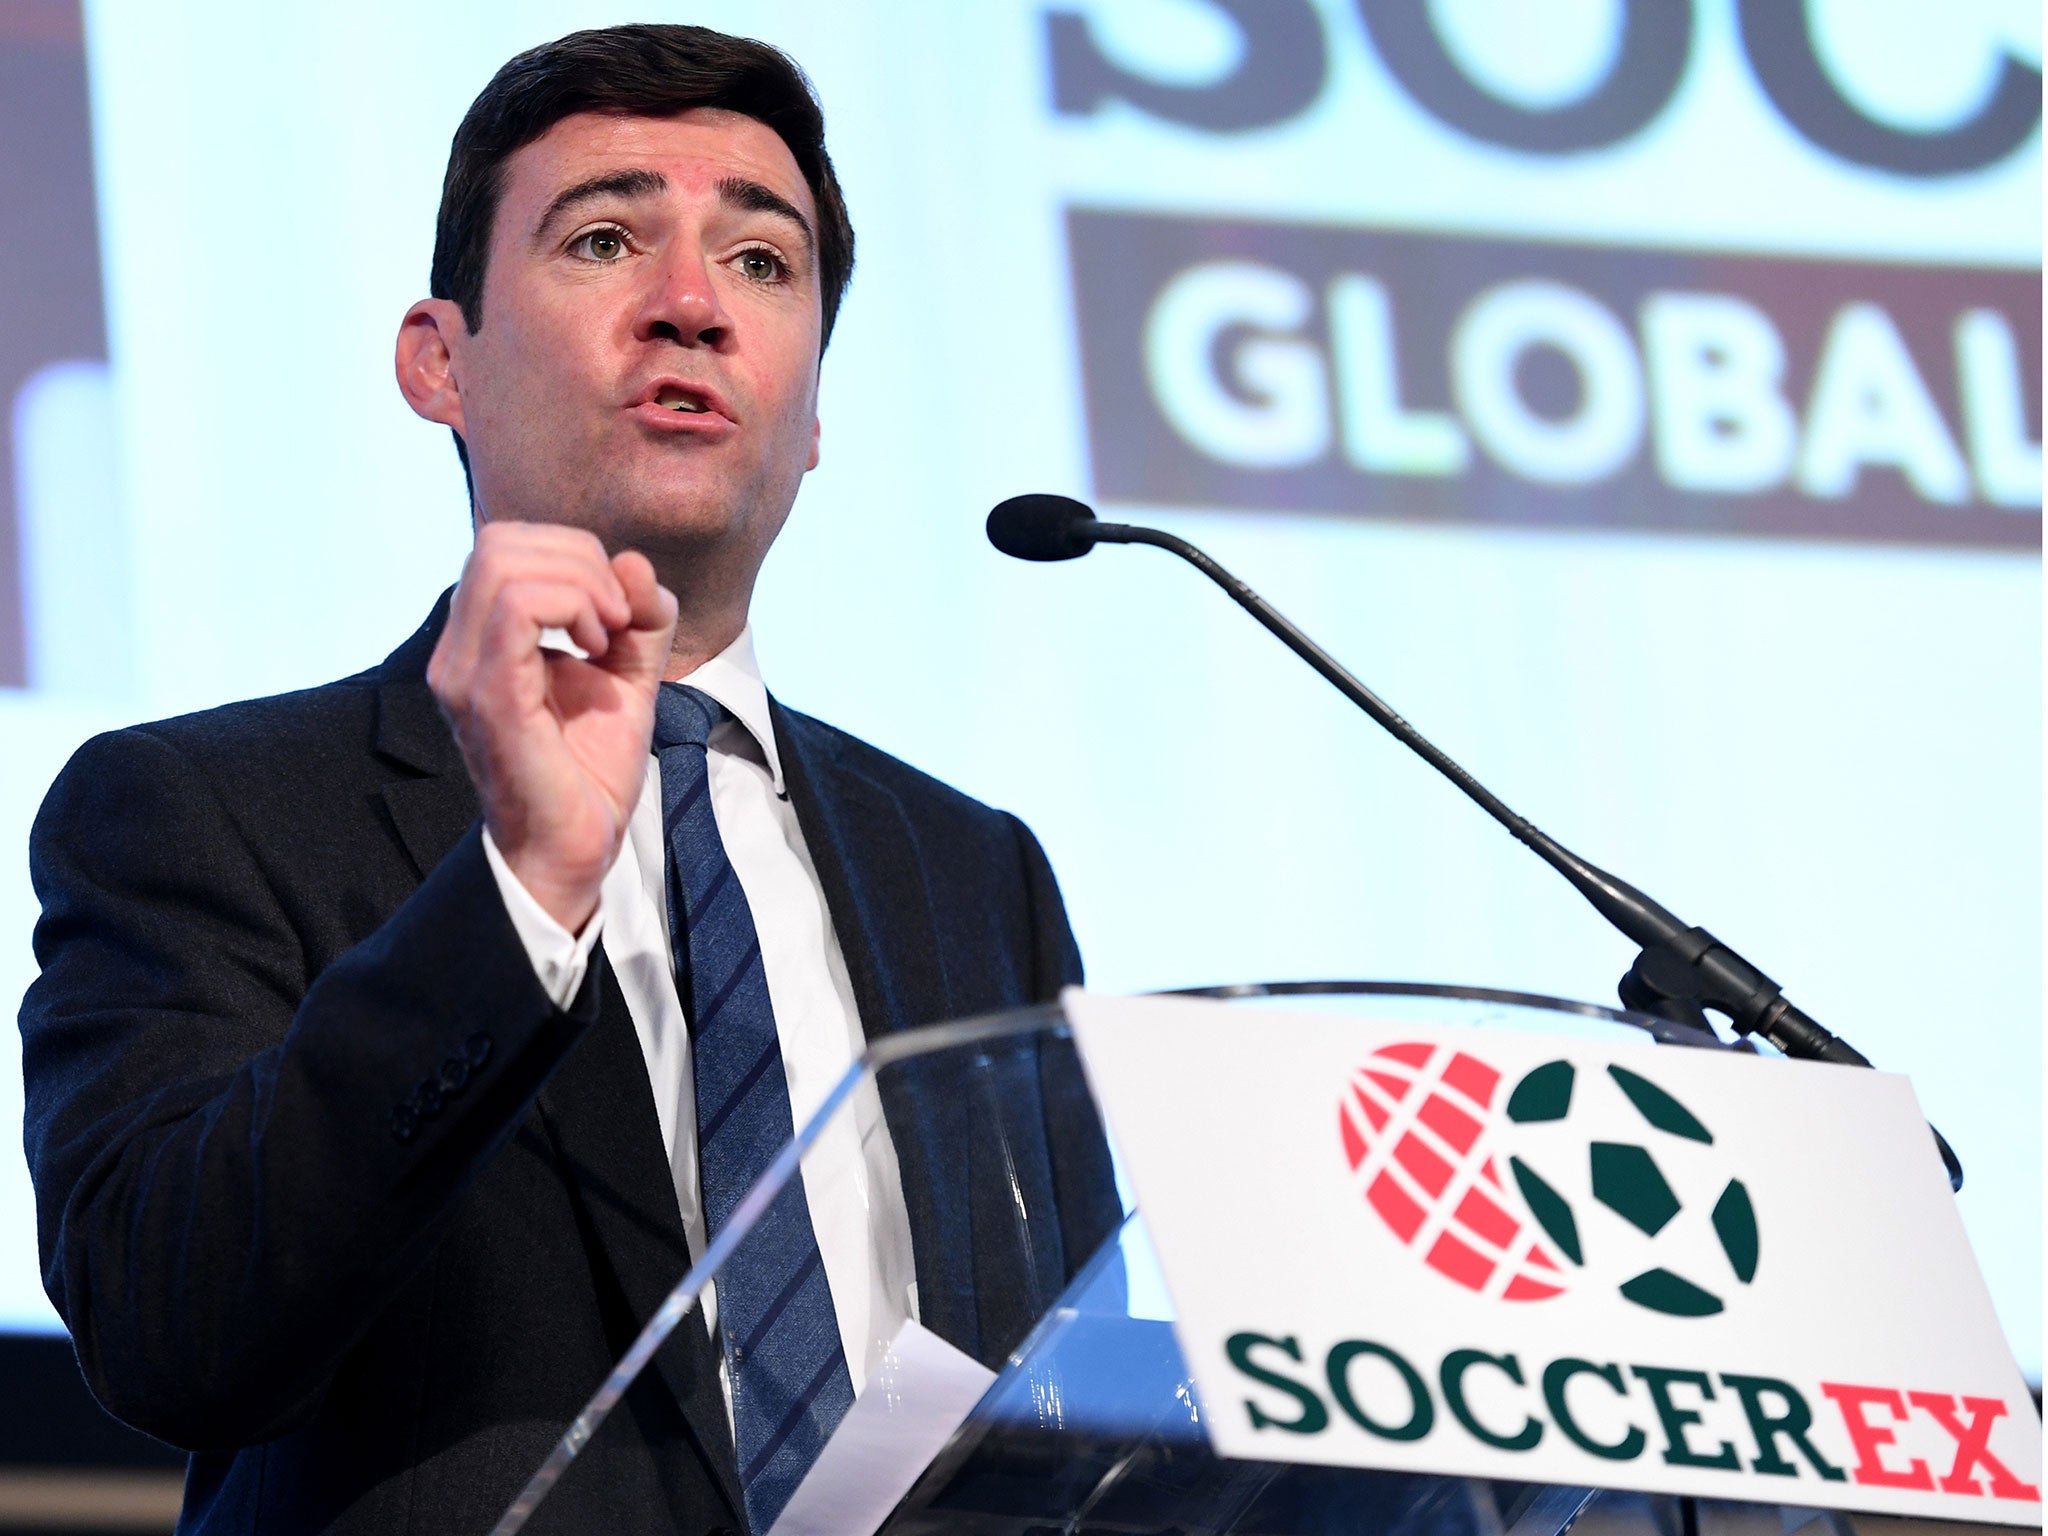 Andy Burnham speaking in Manchester at the Soccerex Global Convention